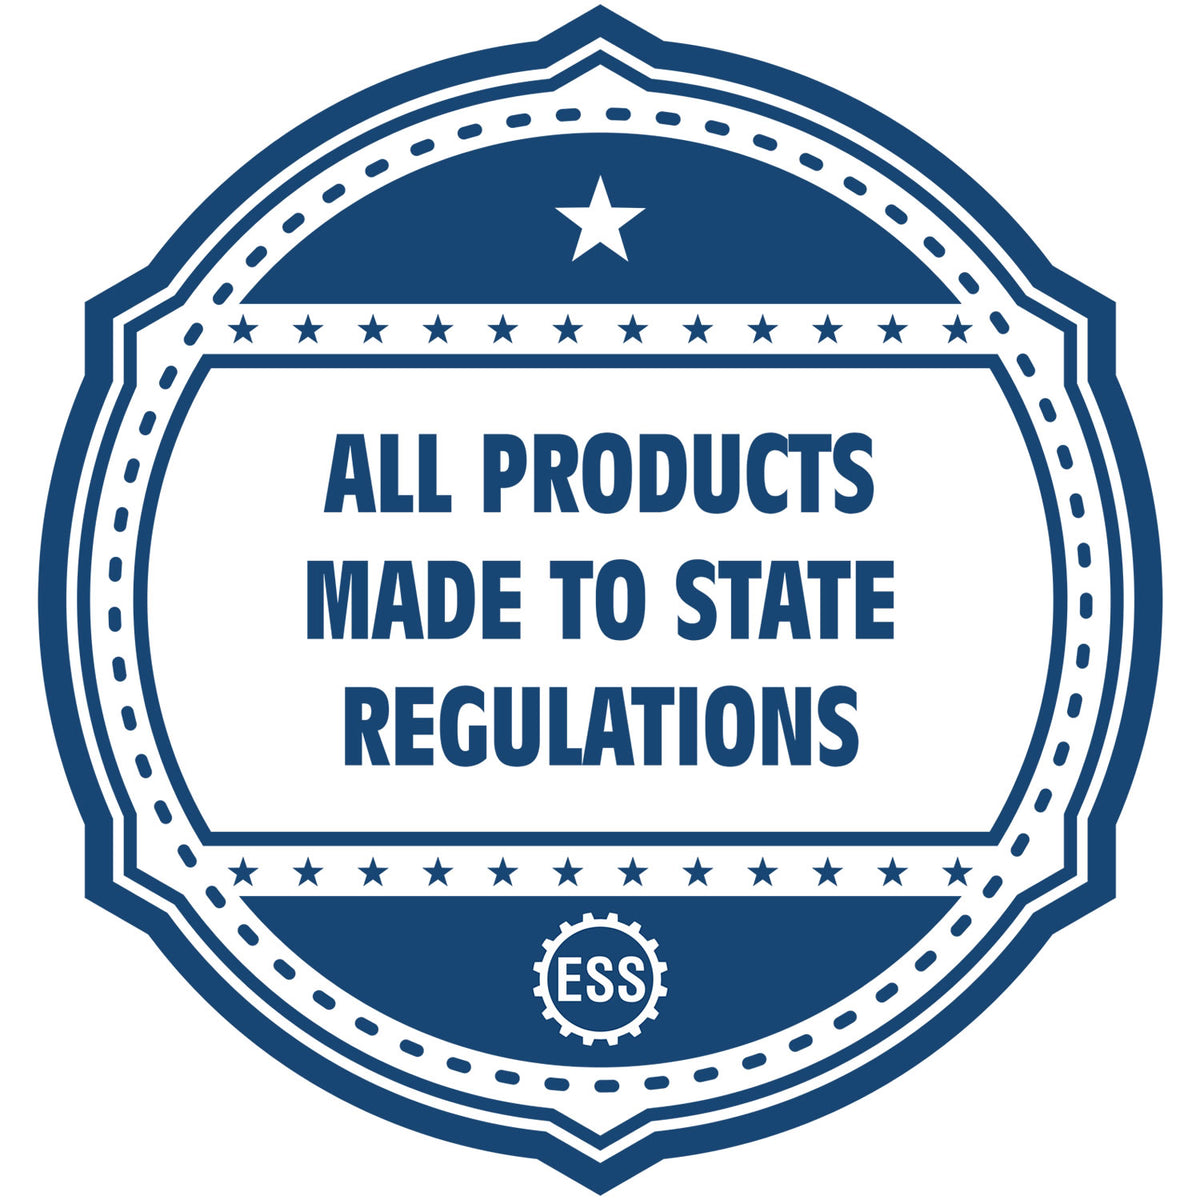 A blue icon or badge for the Gift West Virginia Landscape Architect Seal showing that this product is made in compliance with state regulations.